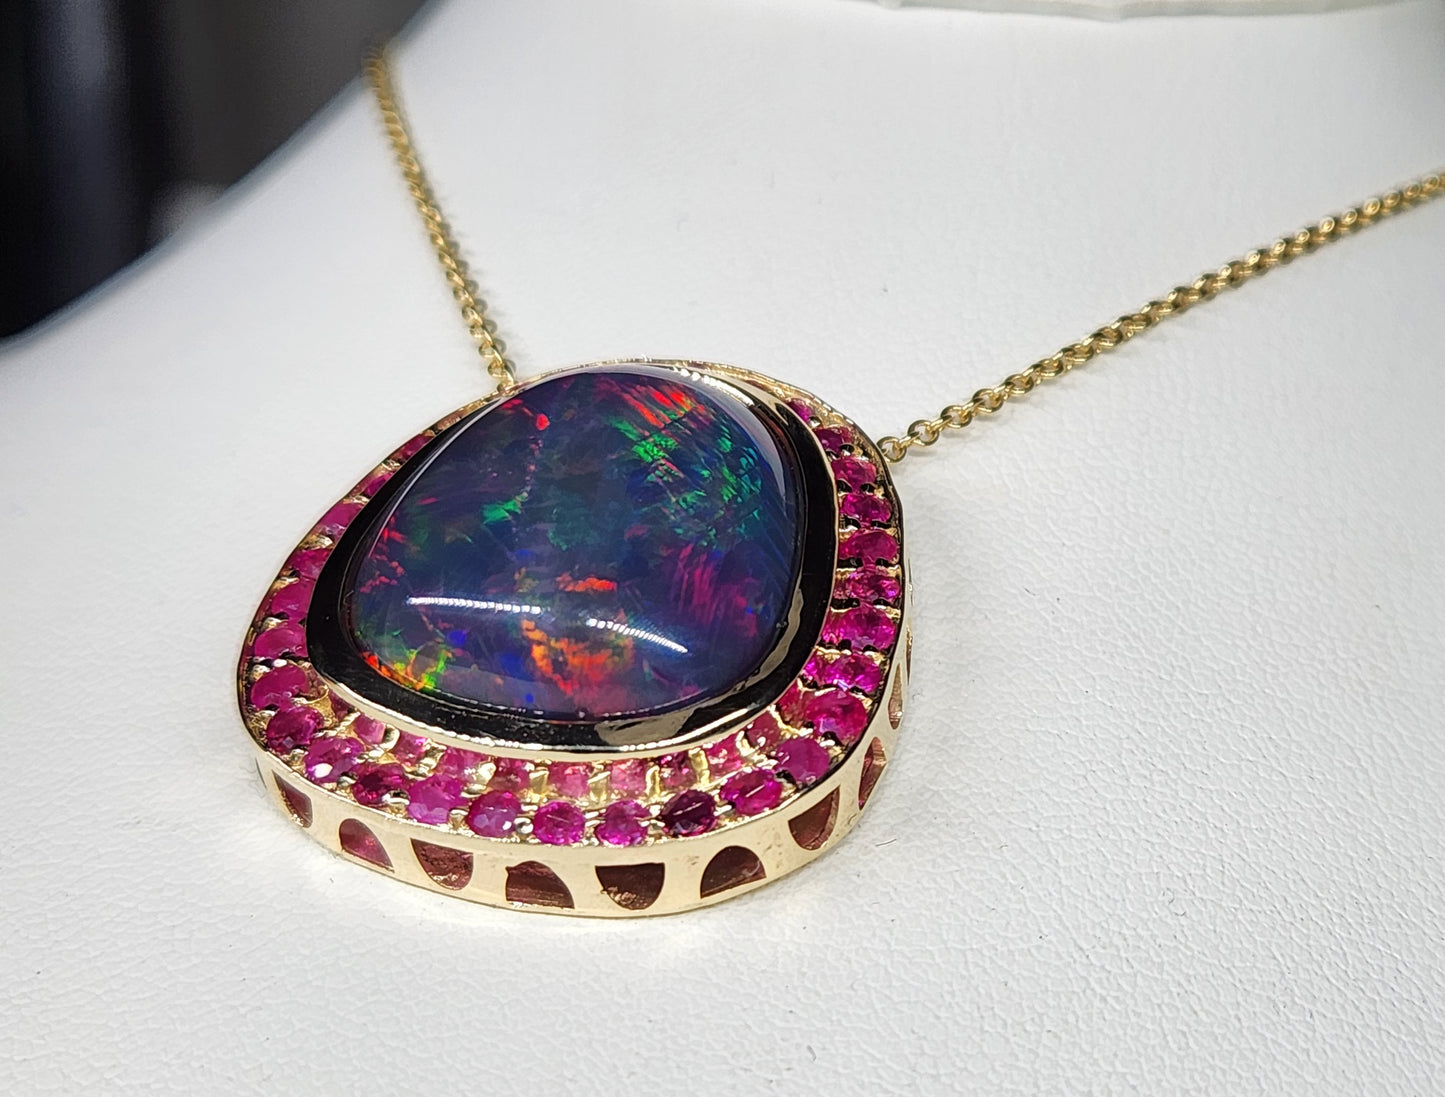 Black Opal & Ruby Pendant 14k Yellow Gold Necklace #397